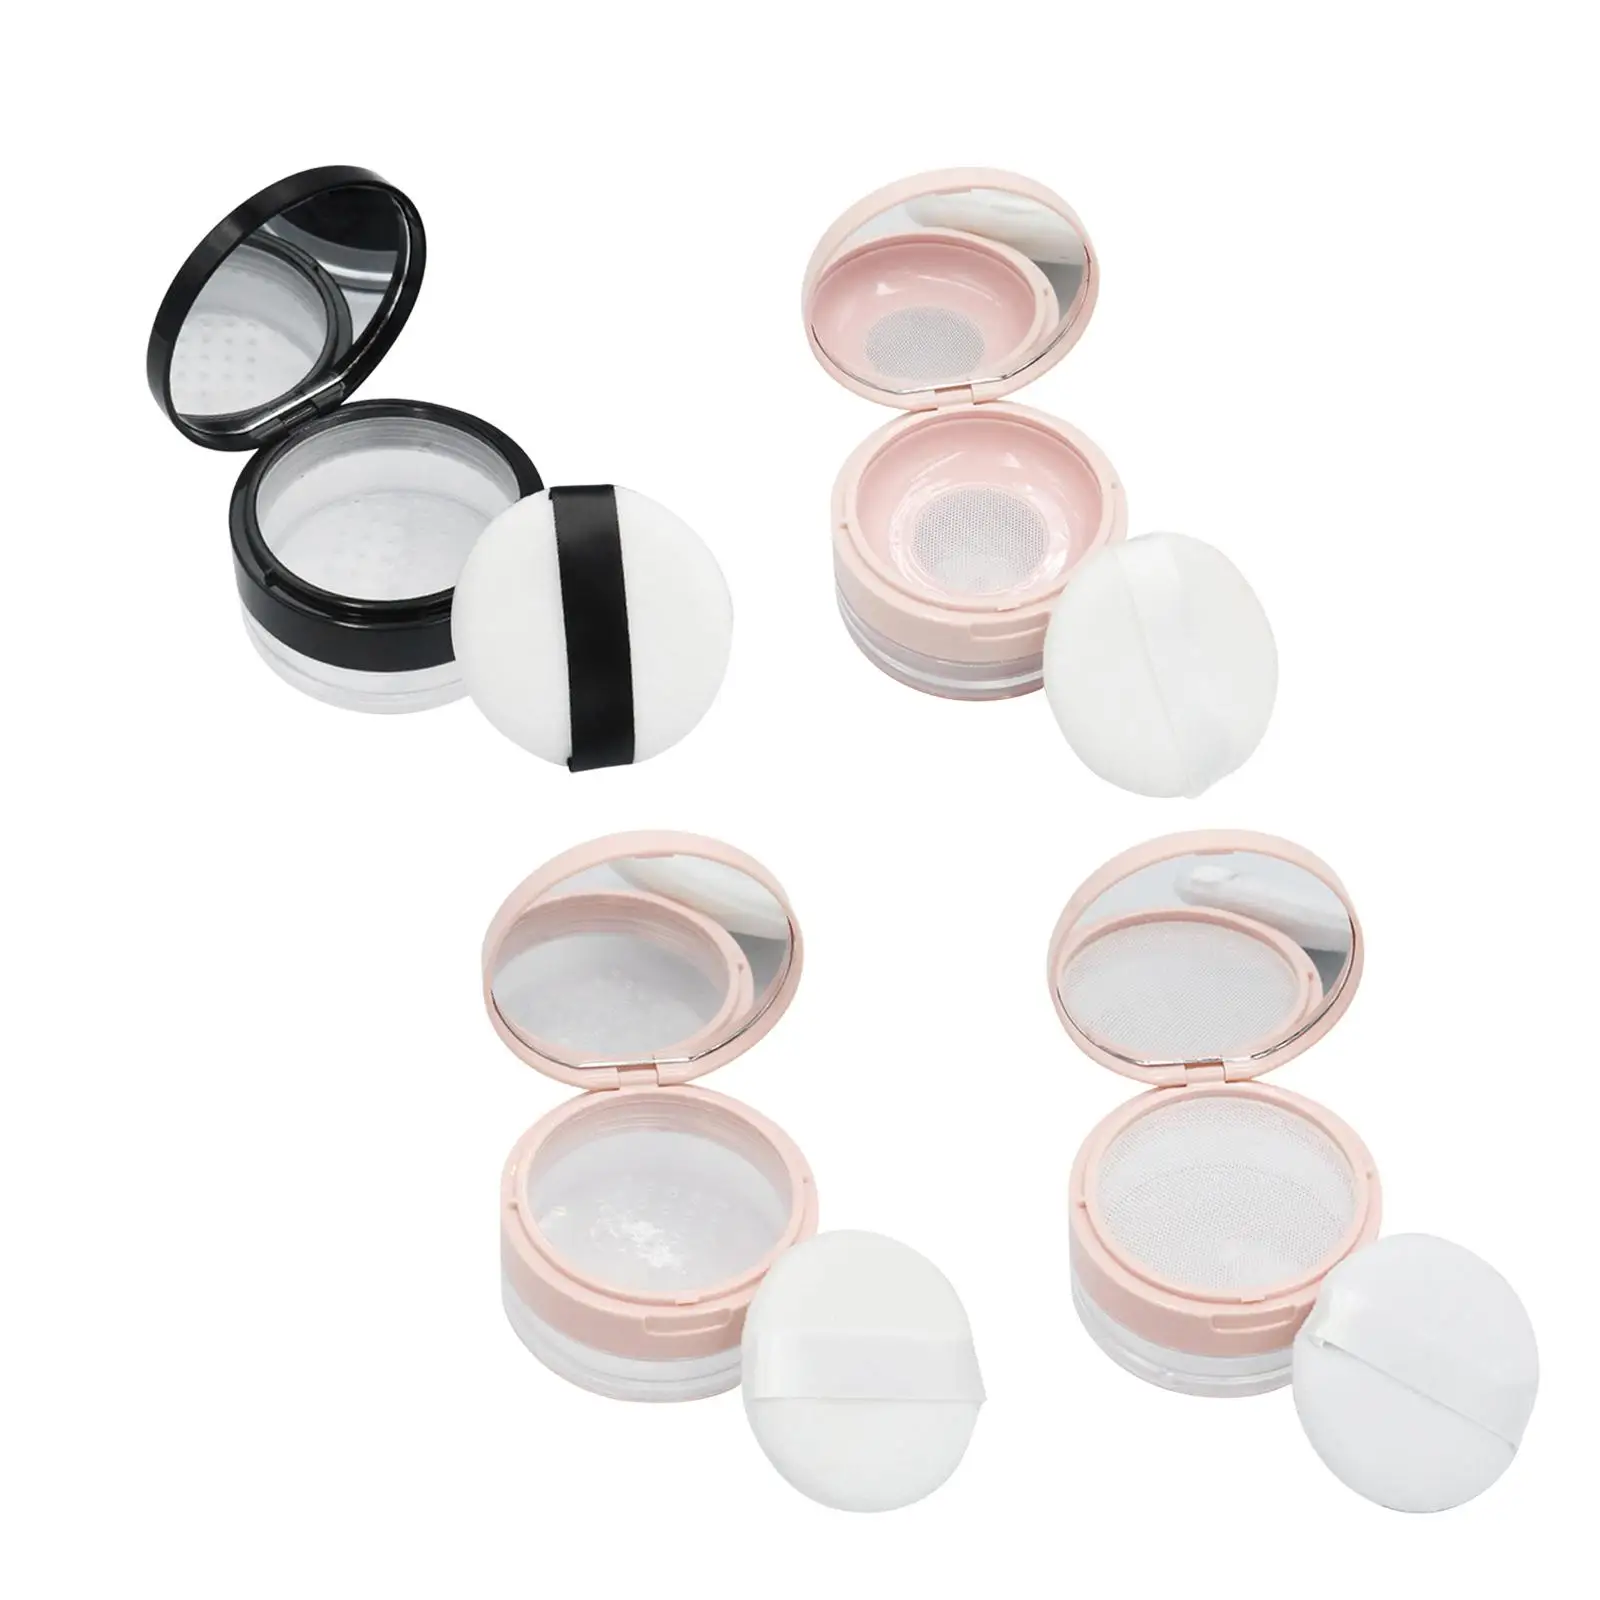 Makeup Powder Container with Puff Mirror DIY Cosmetic Jar Compact Travel Flip Lid Capacity 20ml(0.67 oz) Loose Face Powder Case